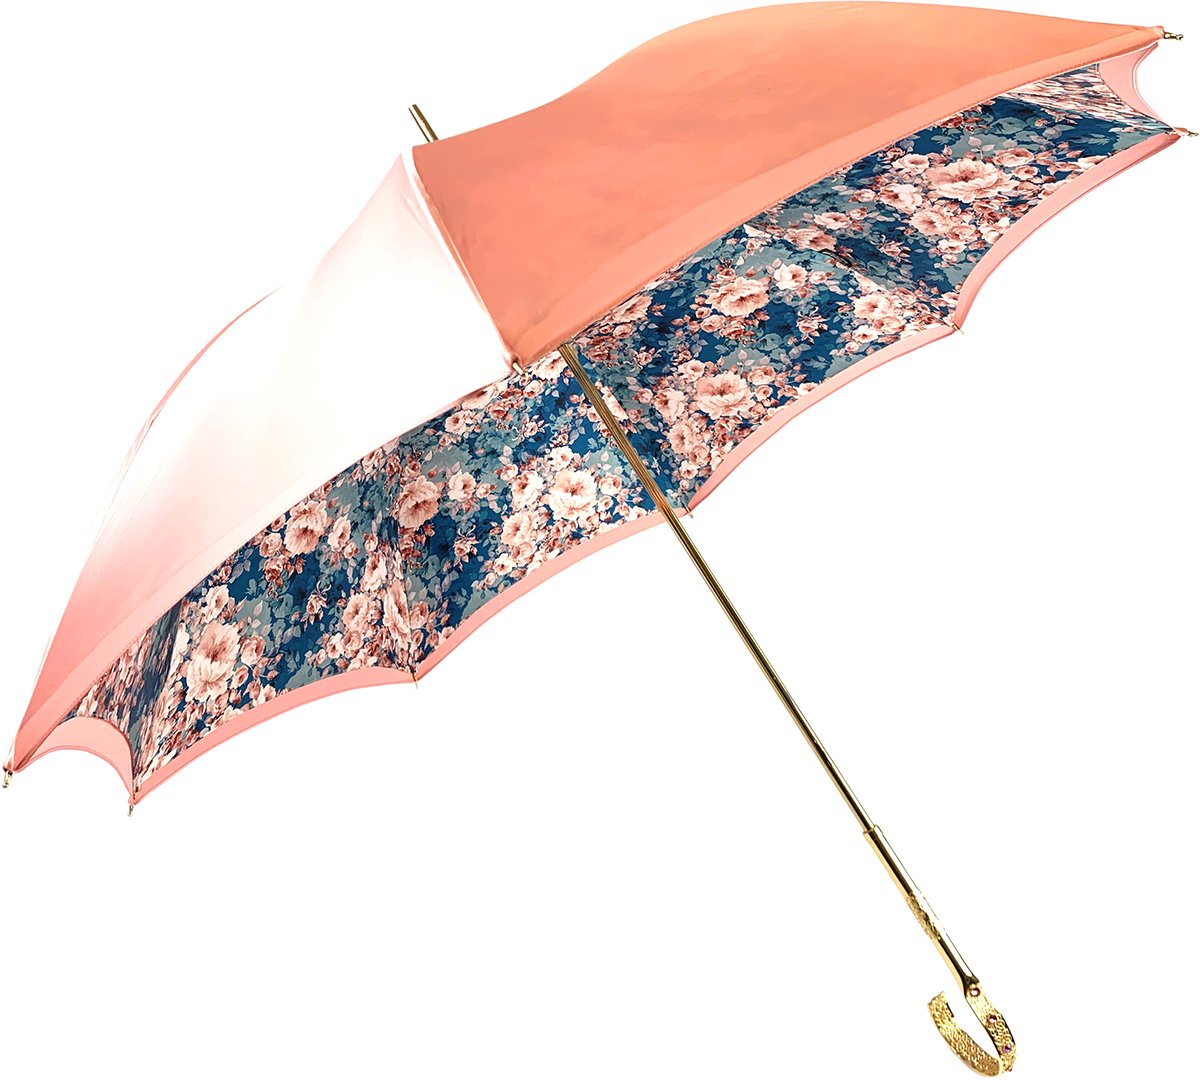 Beautiful Double Canopy Umbrella in a Luxurious Pink Satin - IL MARCHESATO LUXURY UMBRELLAS, CANES AND SHOEHORNS